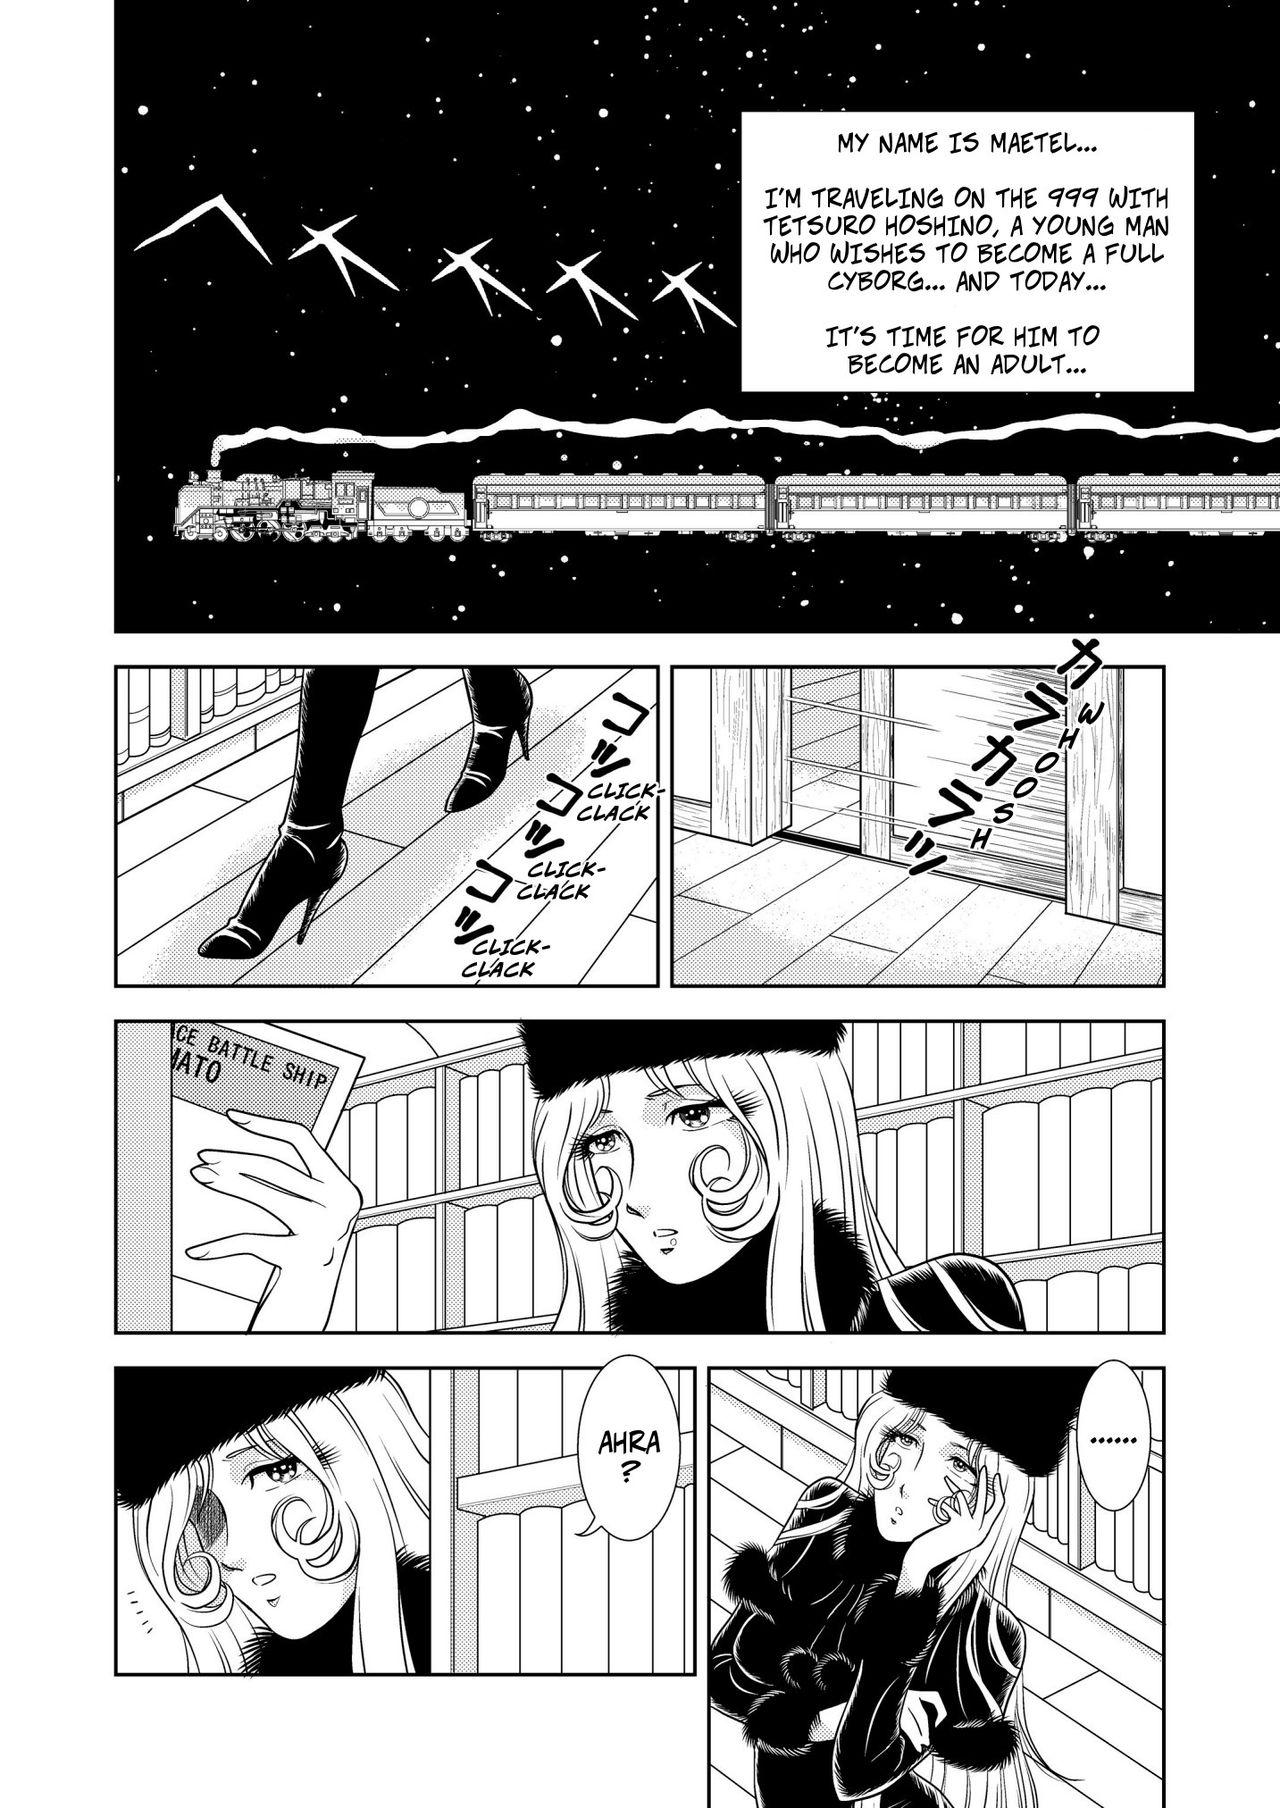 Toilet Maetel Story 2 - Galaxy express 999 Black Dick - Page 2